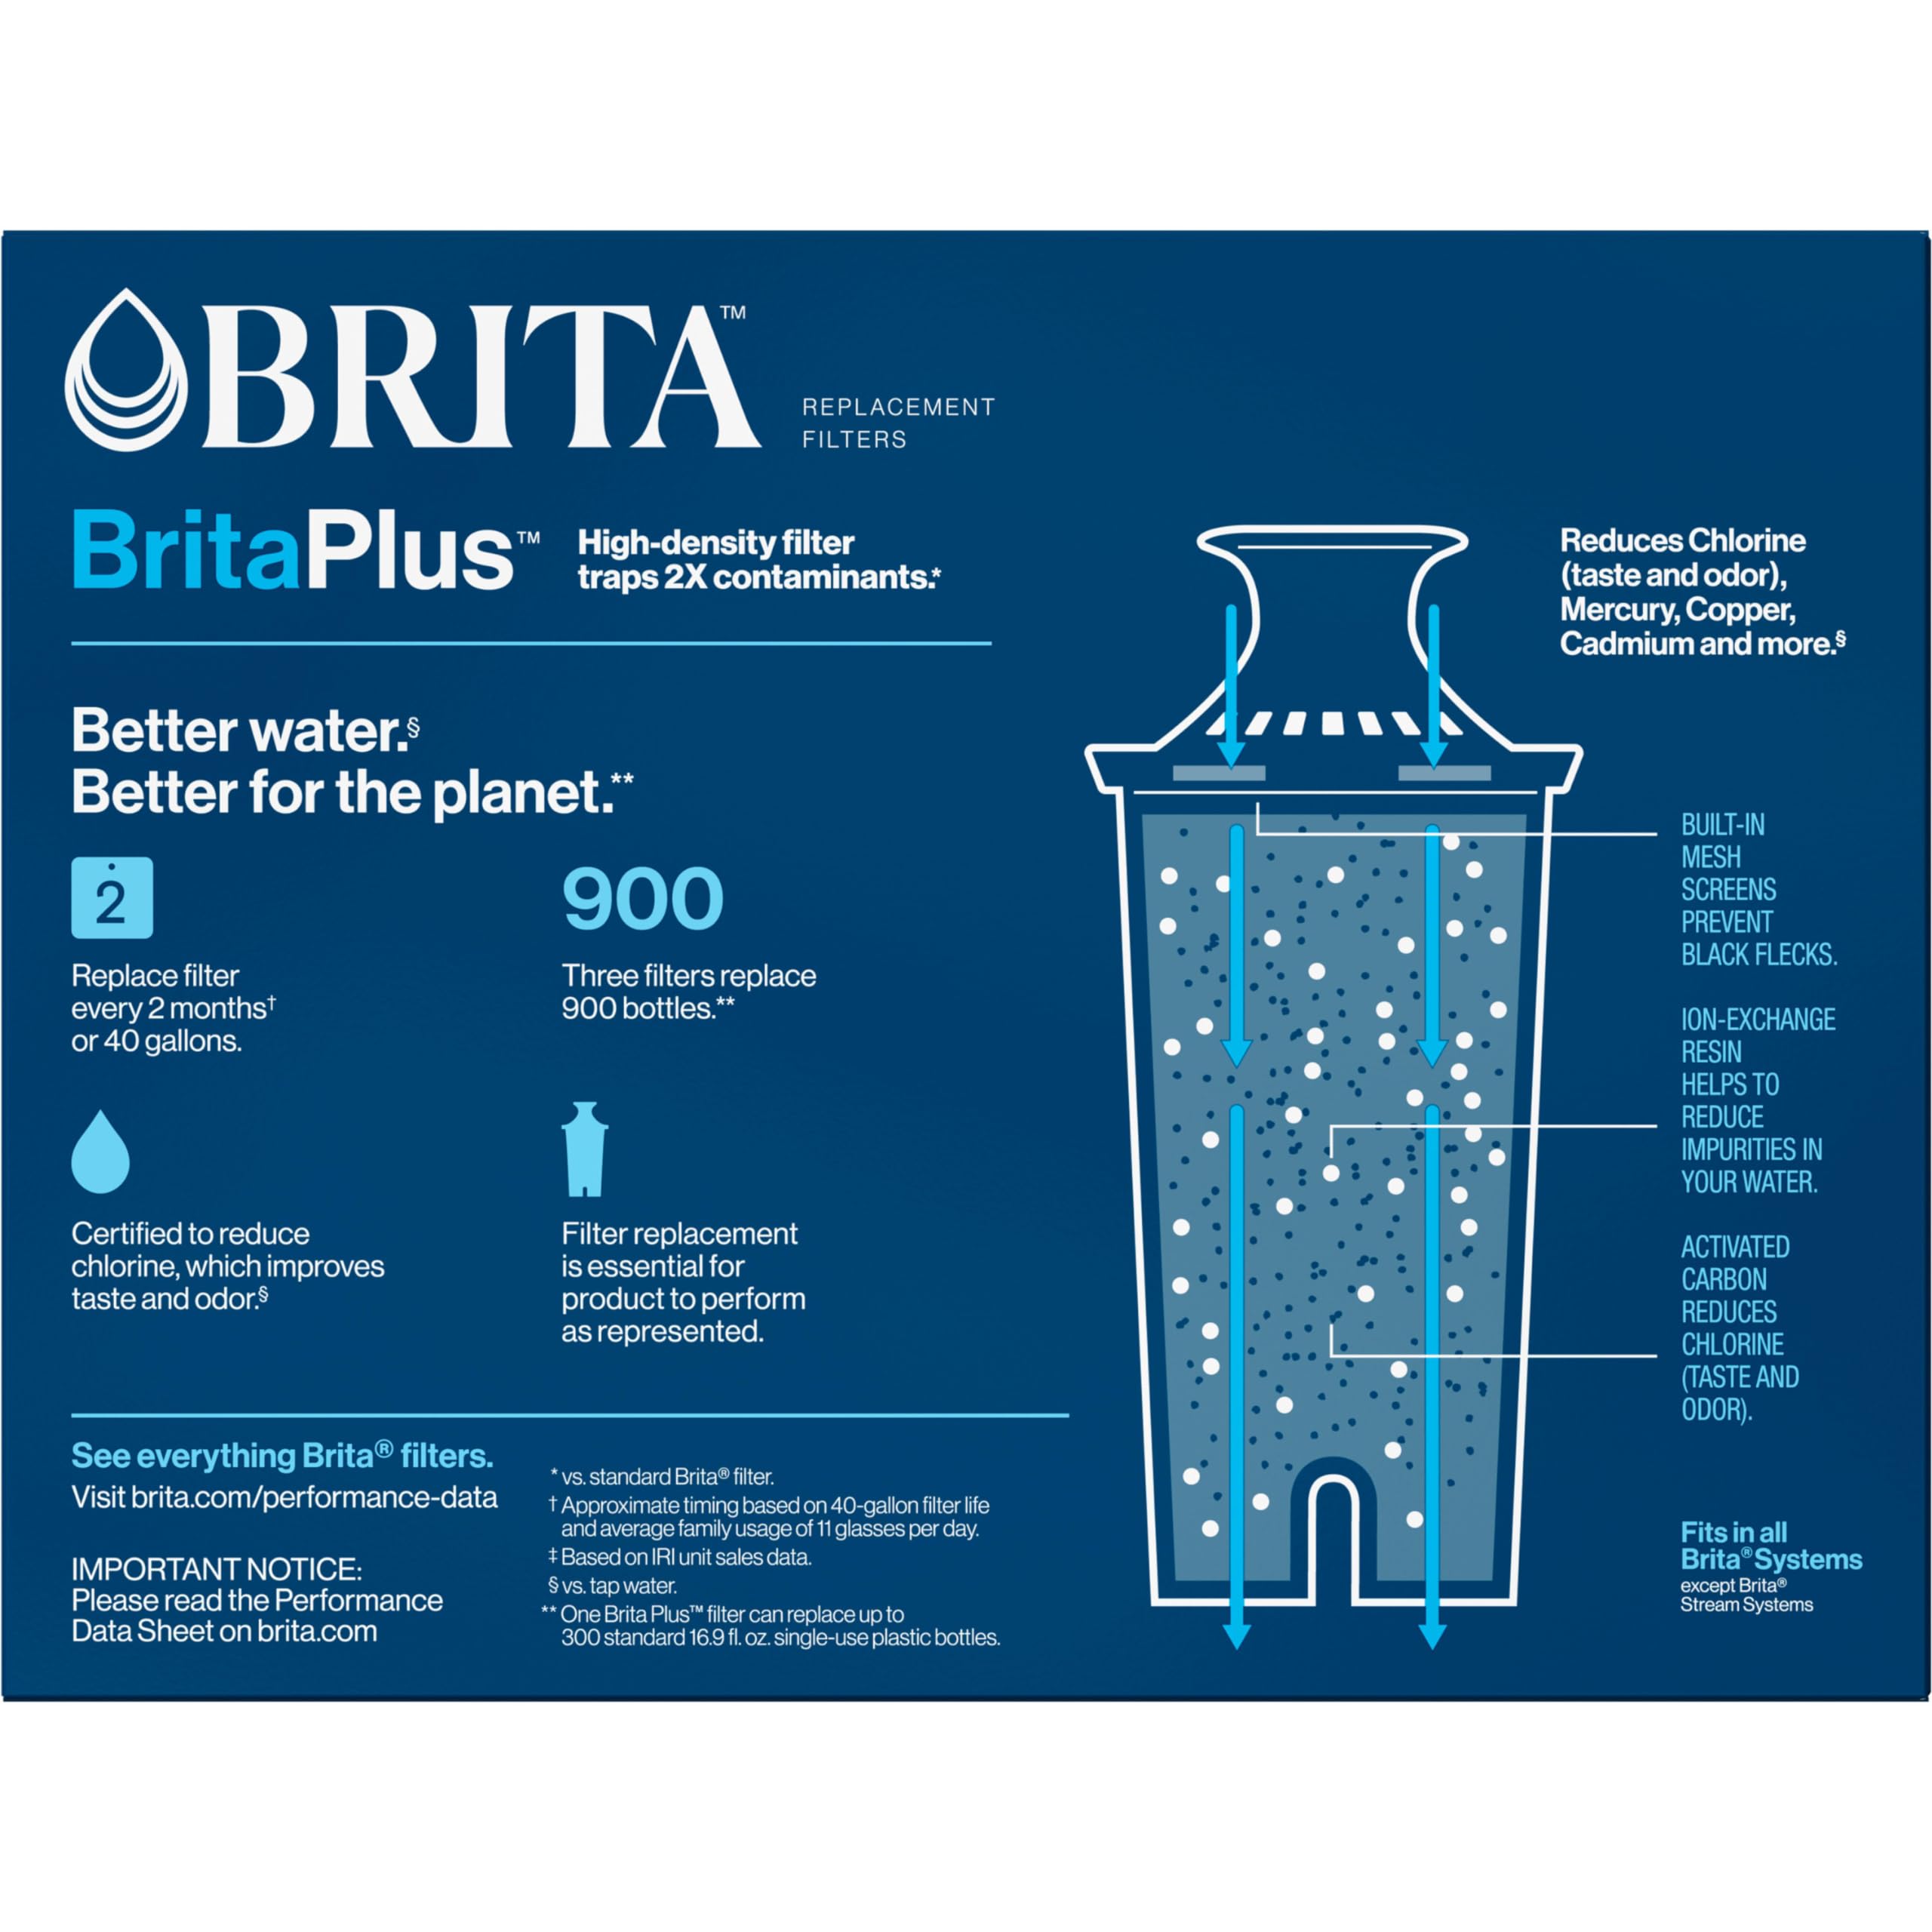 Brita Plus Water Filter, High Density Replacement Filter for Pitchers and Dispensers, Reduces 2x Contaminants*, Lasts 2 Months, 3 Count